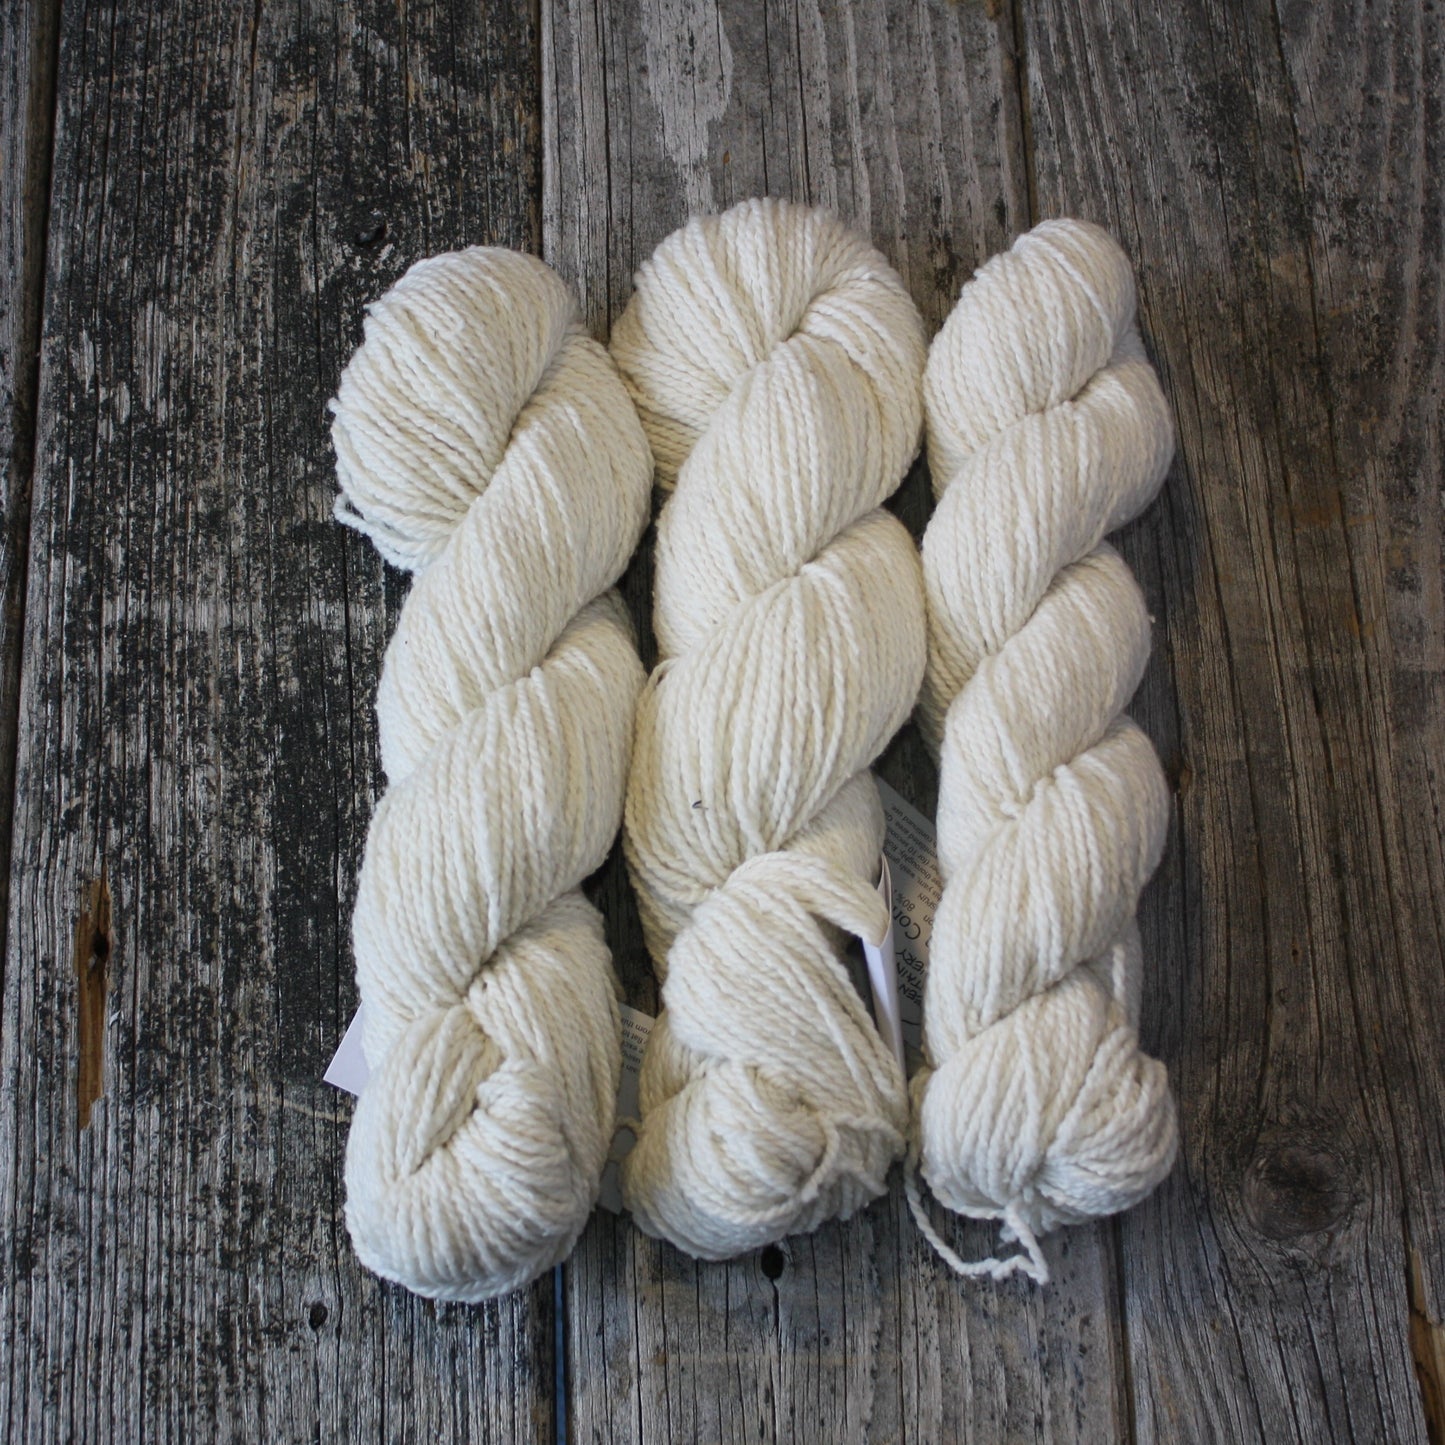 Cotton Comfort by Green Mountain Spinnery: Unbleached White